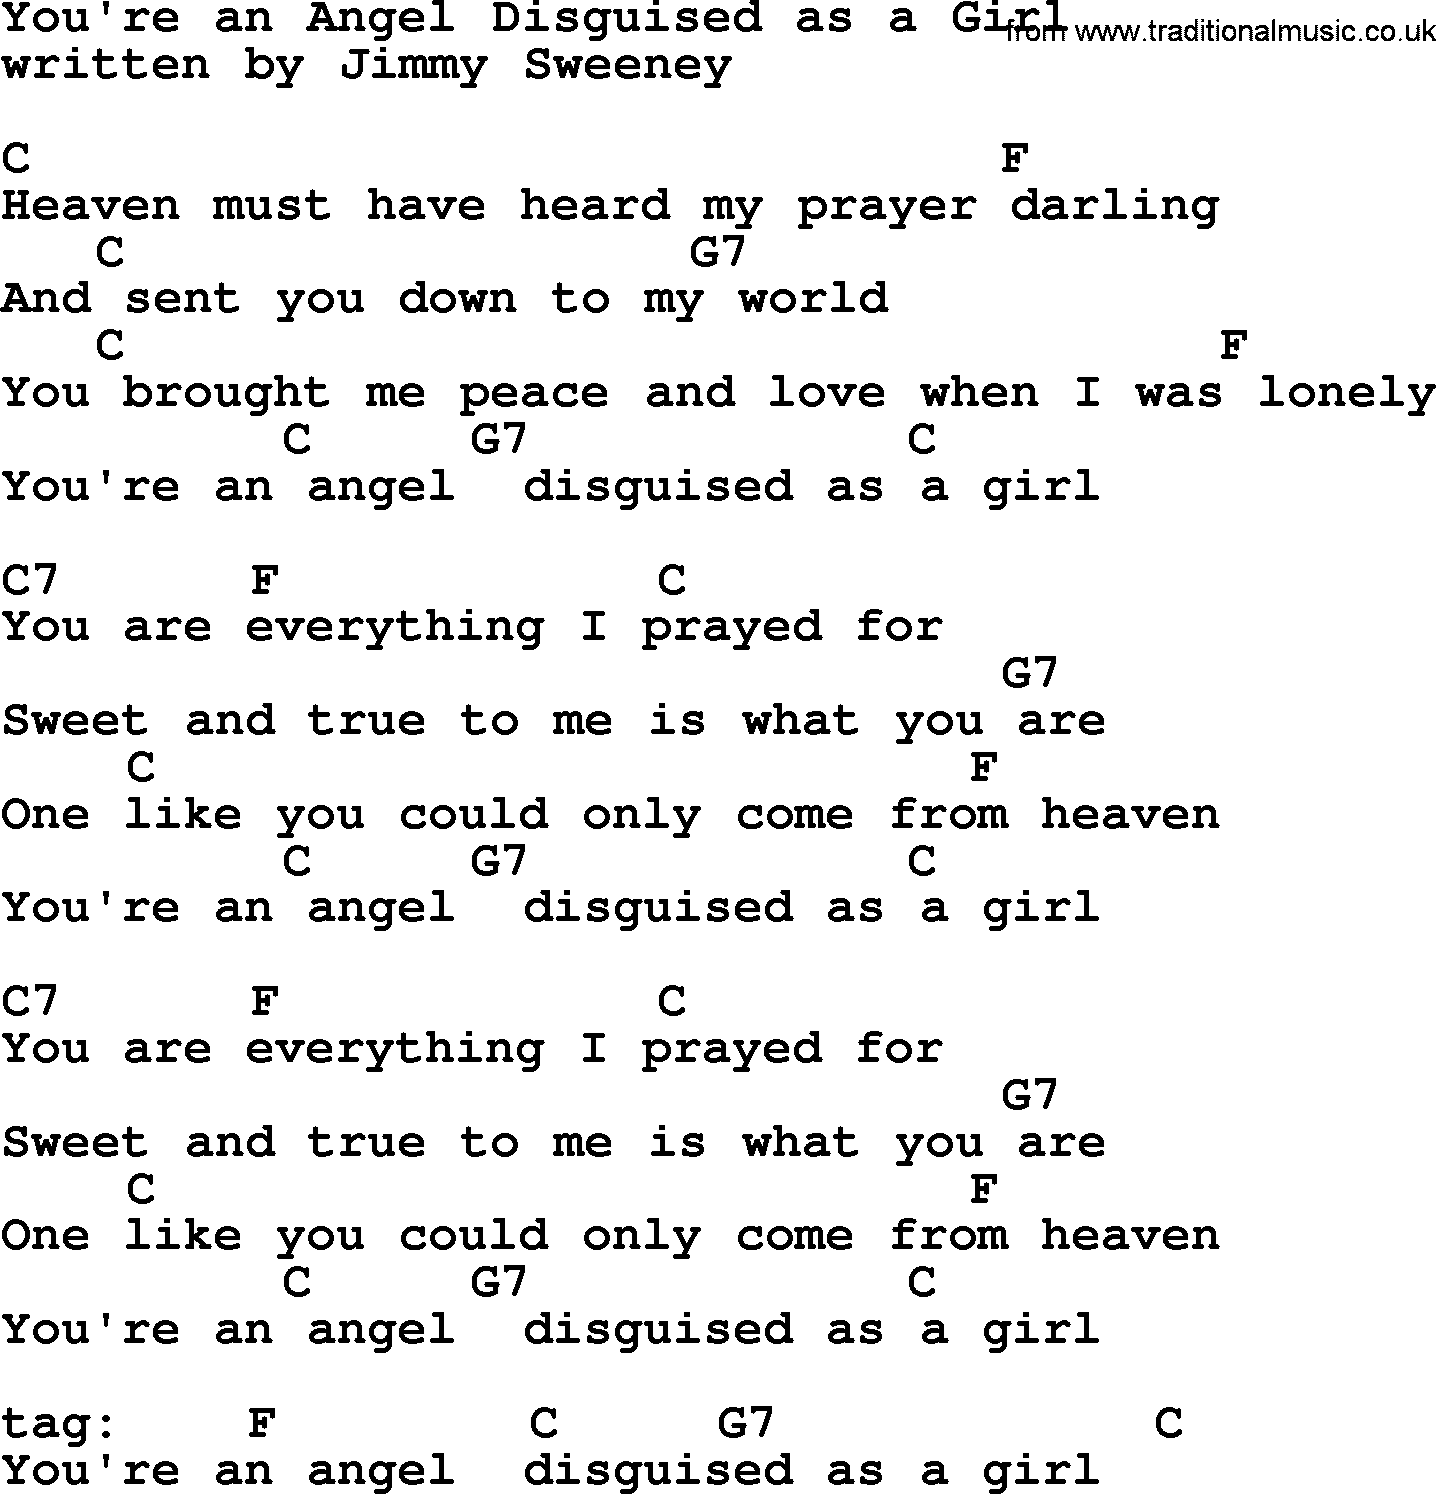 Marty Robbins song: You're an Angel Disguised as a Girl, lyrics and chords